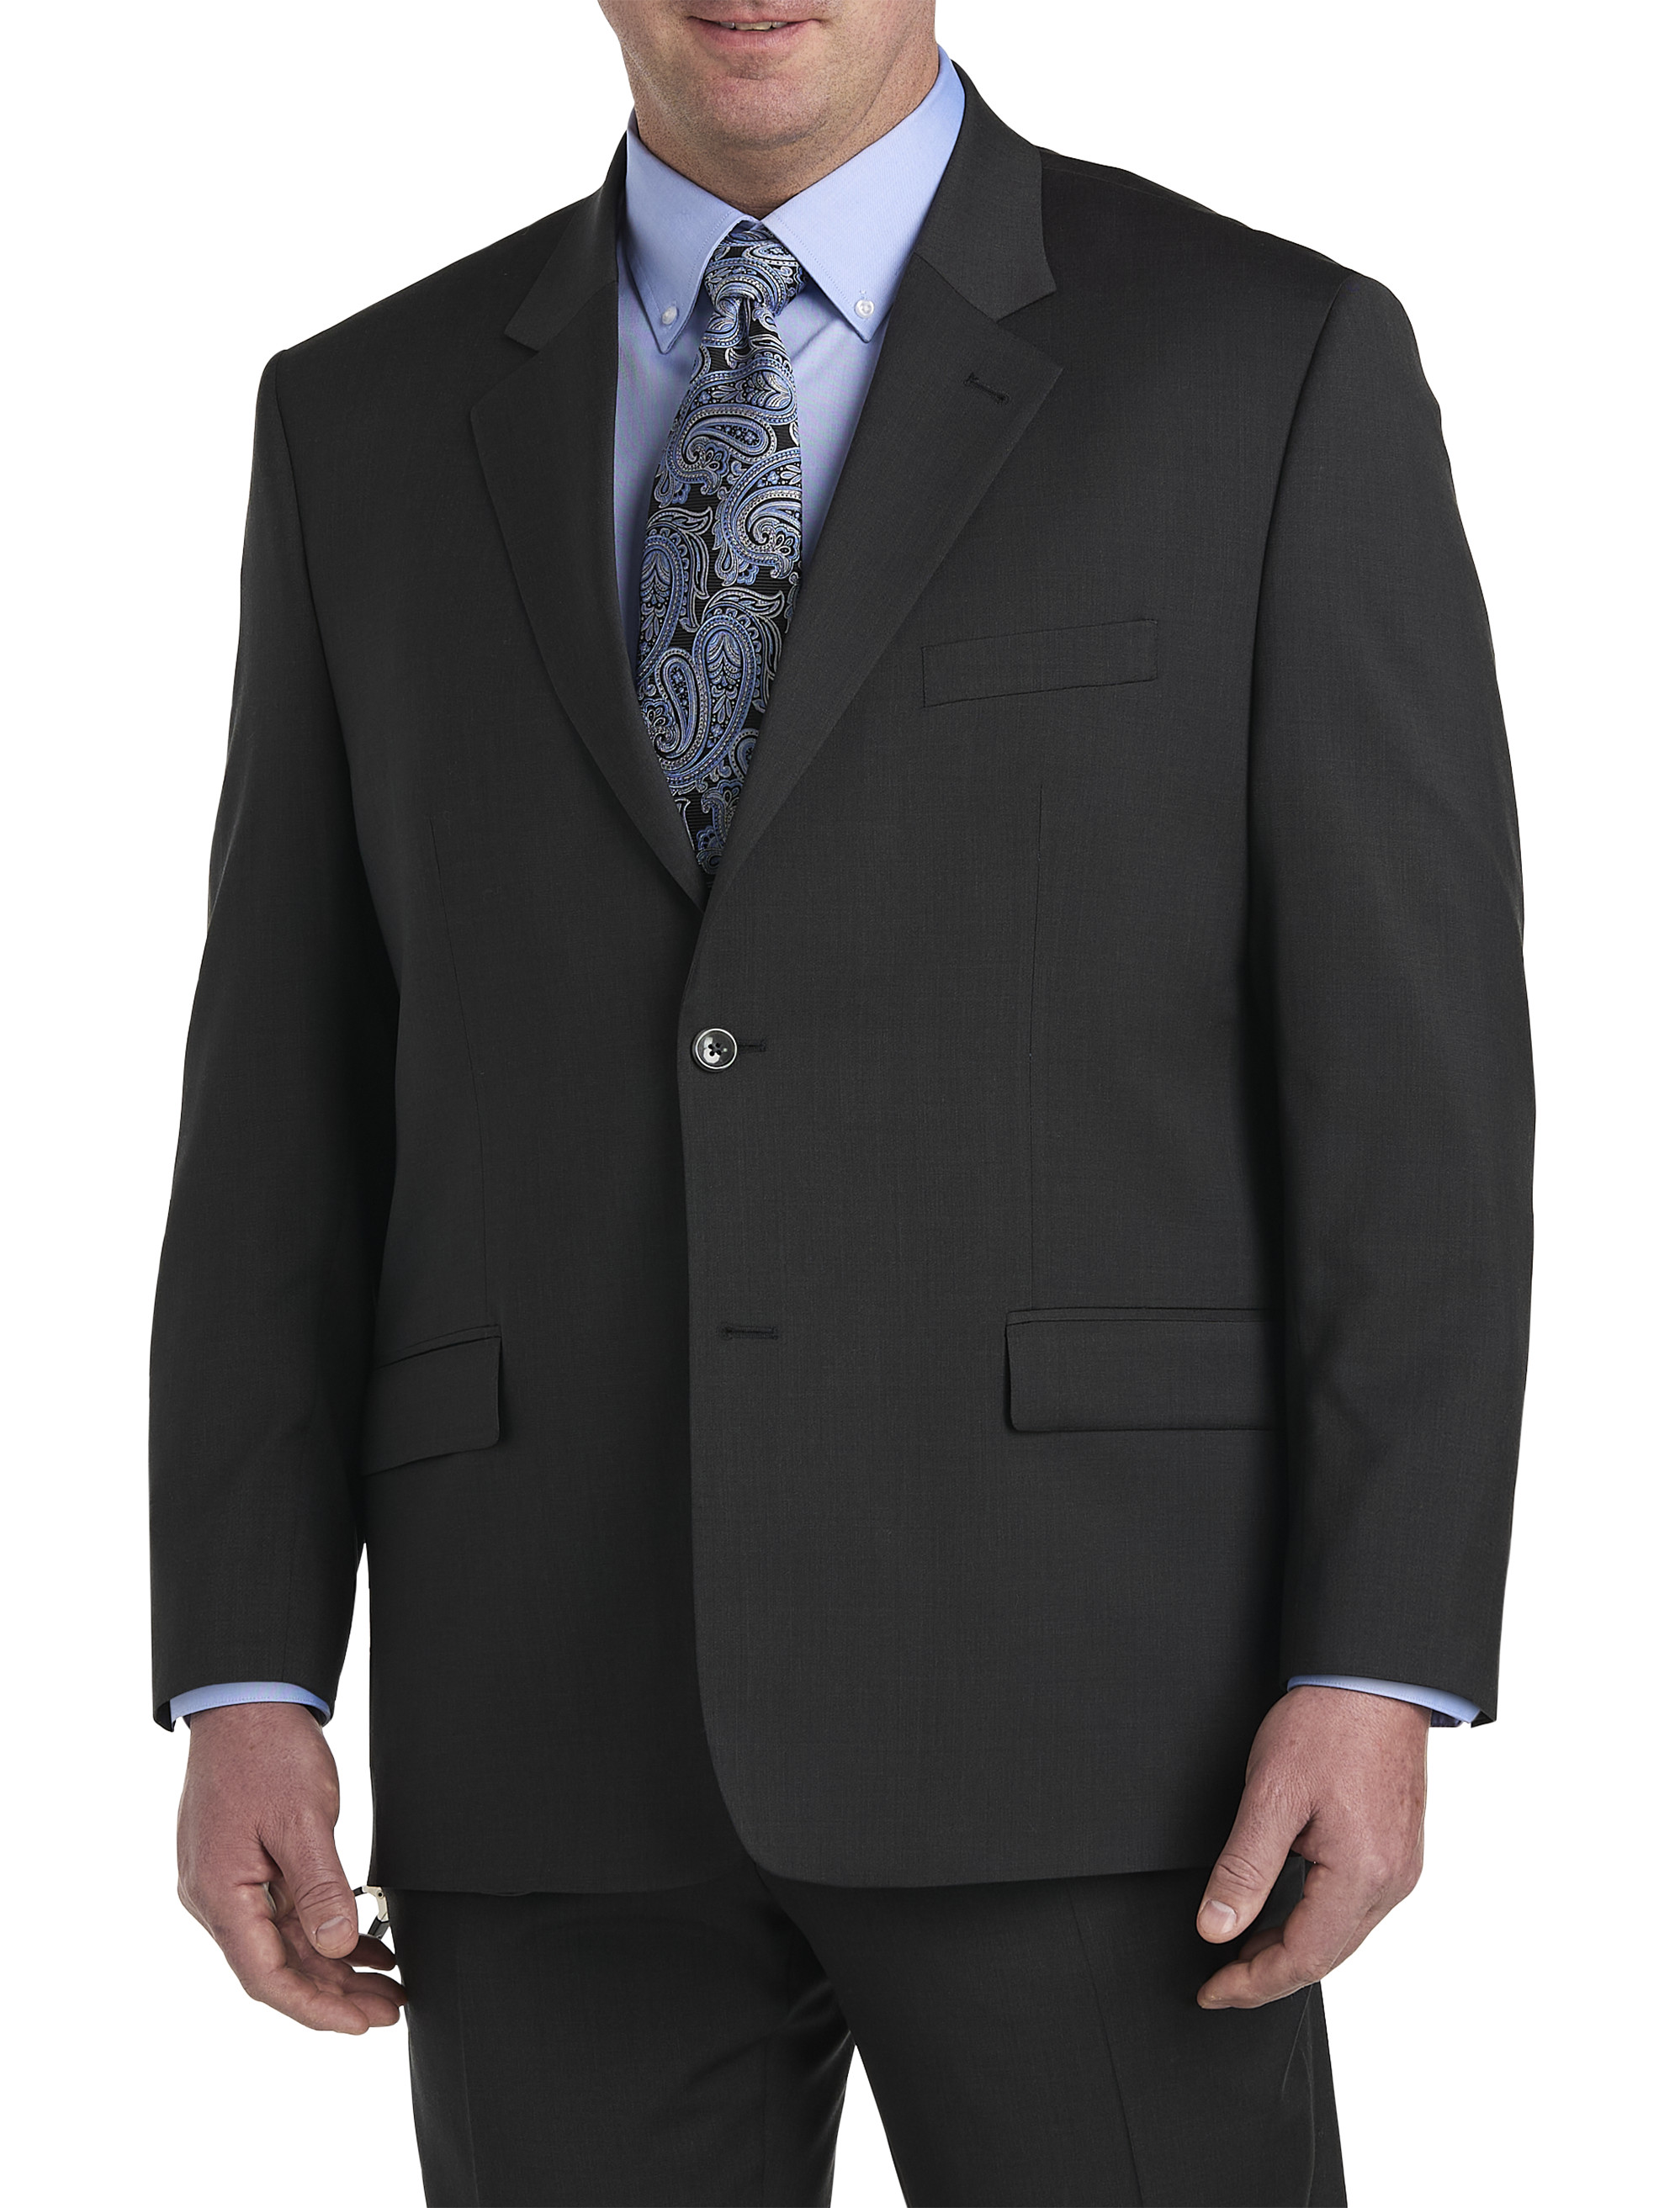 Oak Hill by DXL Men's Big and Tall Jacket Relaxer Windowpane Suit Jacket  Grey 60 L